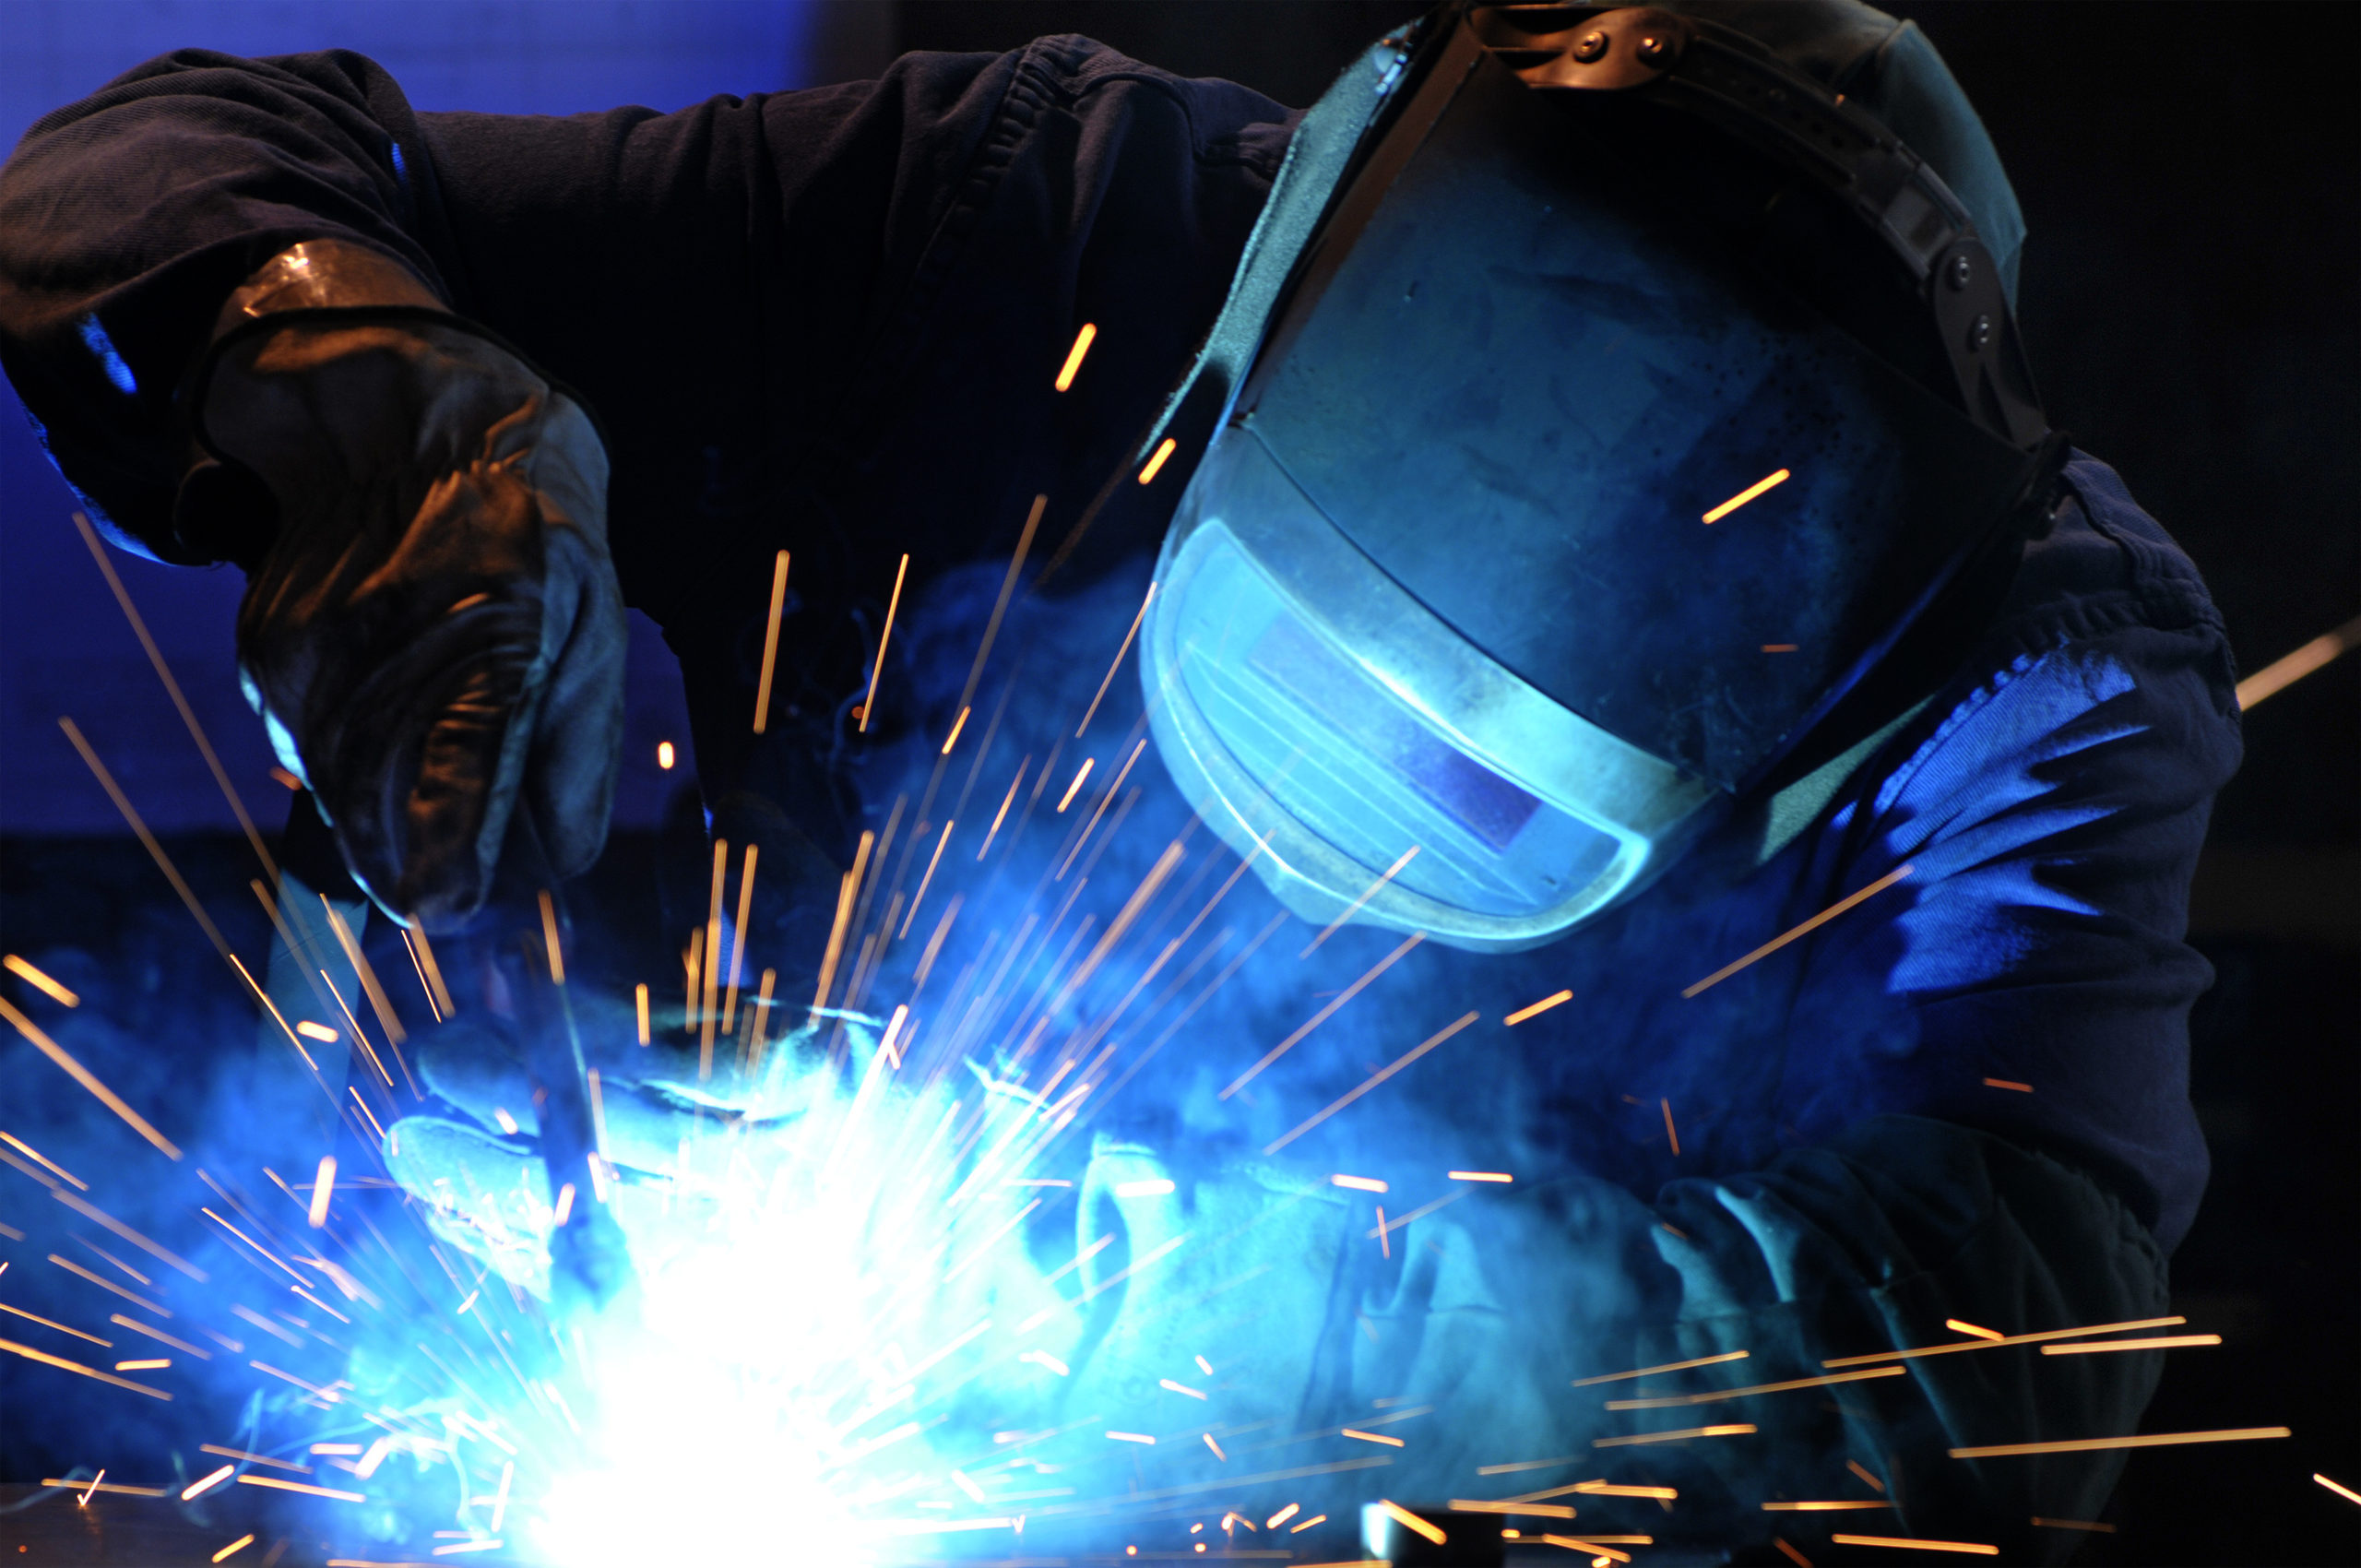 American Welding Society Launches Initiative to Reach Younger Workforce | THE SHOP